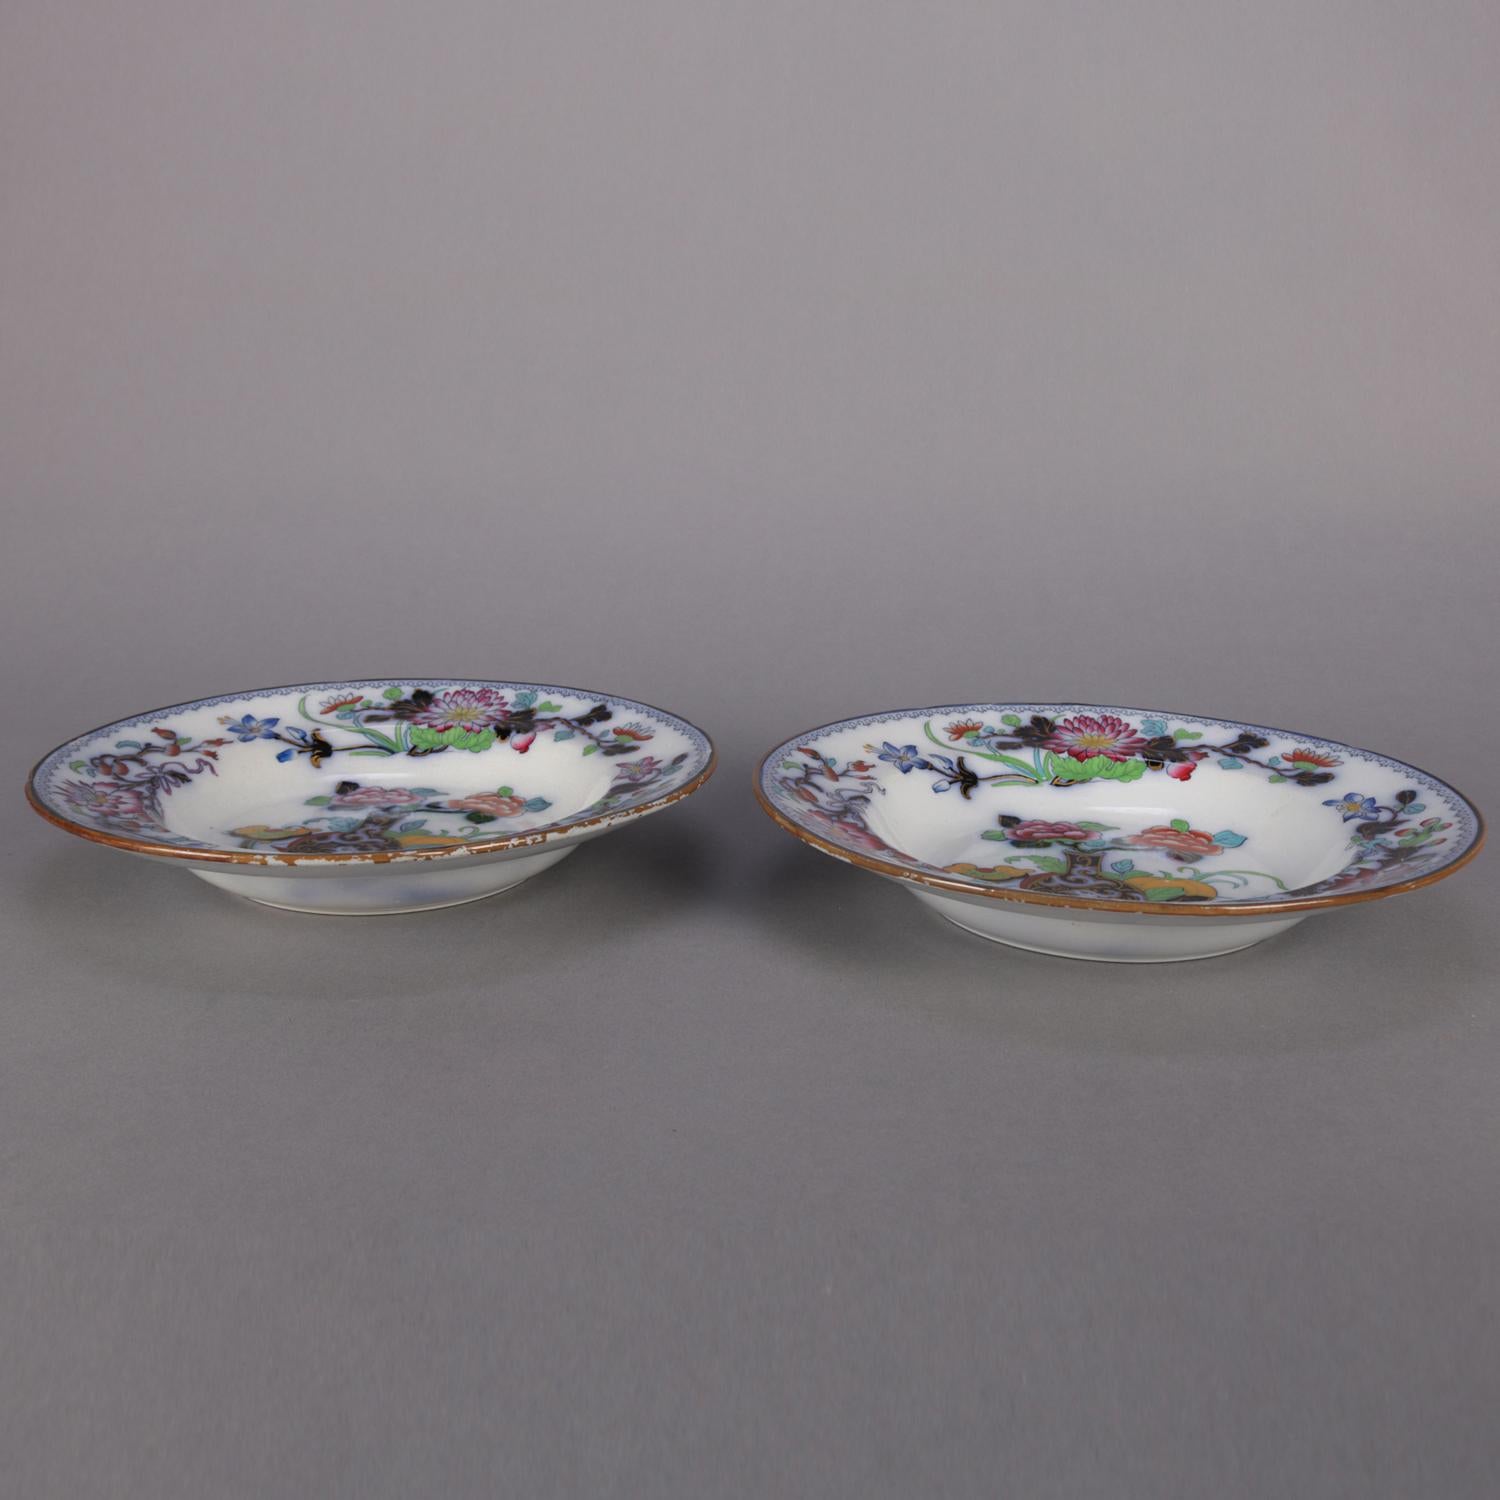 Pair of antique English Wedgwood Noma pattern ironstone bowls feature polychromed, flow blue and gilt Asian floral and urn decoration, one en verso marked NOMA, mid-1800s.

Measures: 1.75